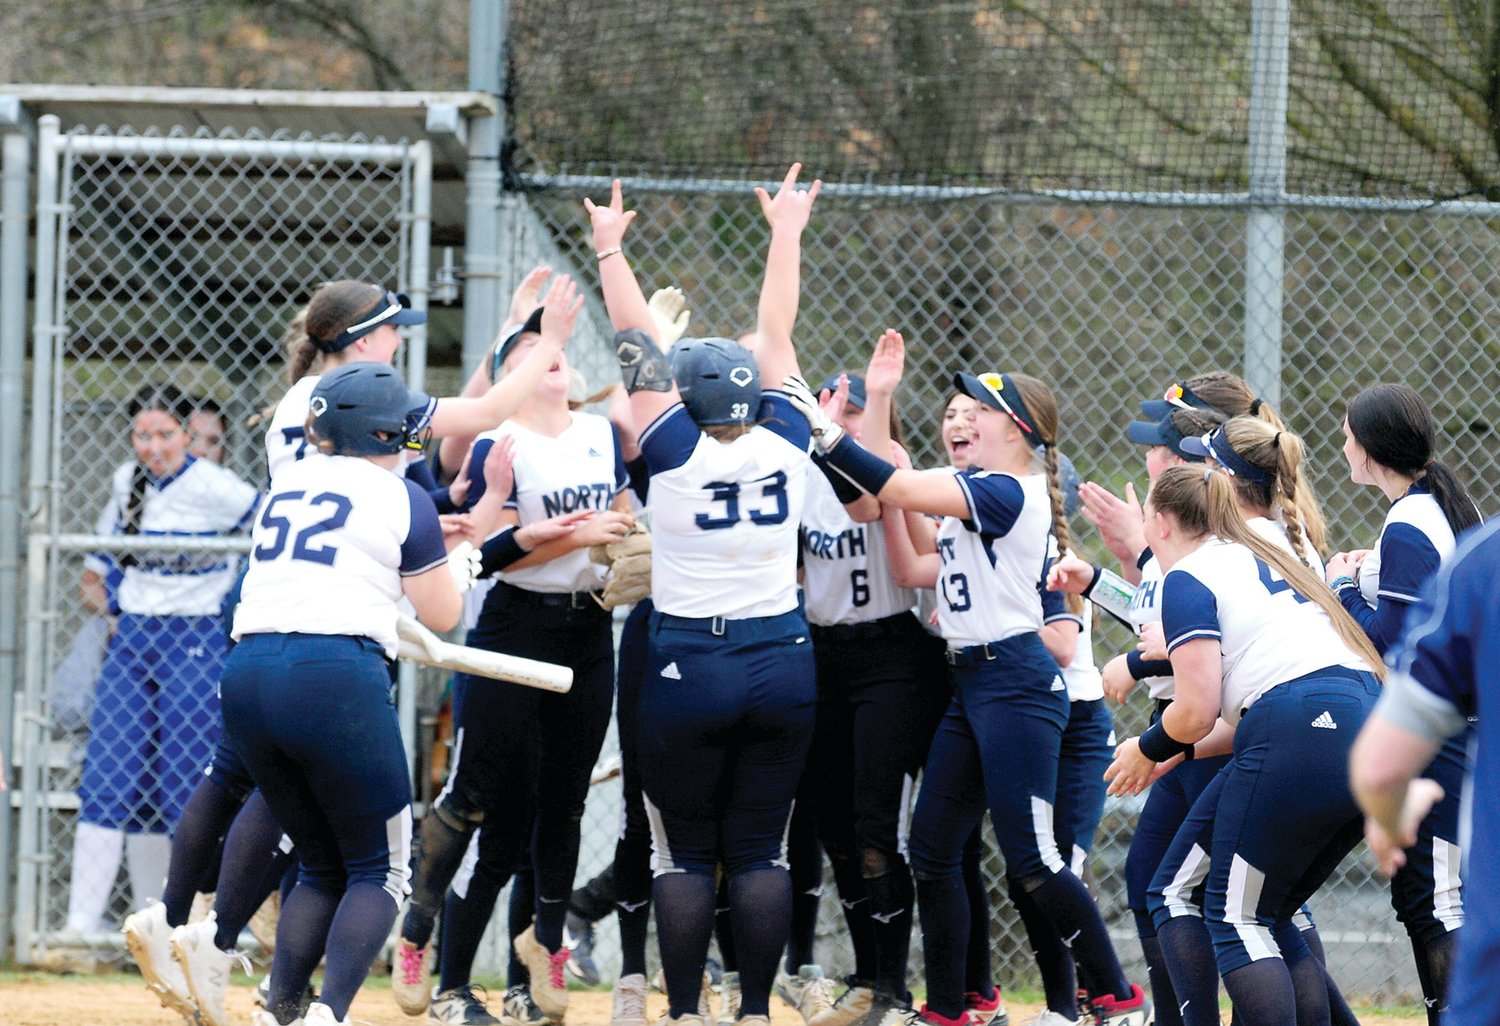 Council Rock North junior Molly Sheehy (No. 33) celebrates with her teammates at home plate after crushing a two-run home run to win a 6-5 battle with Villa Joseph March 31 on the Indians' home field.